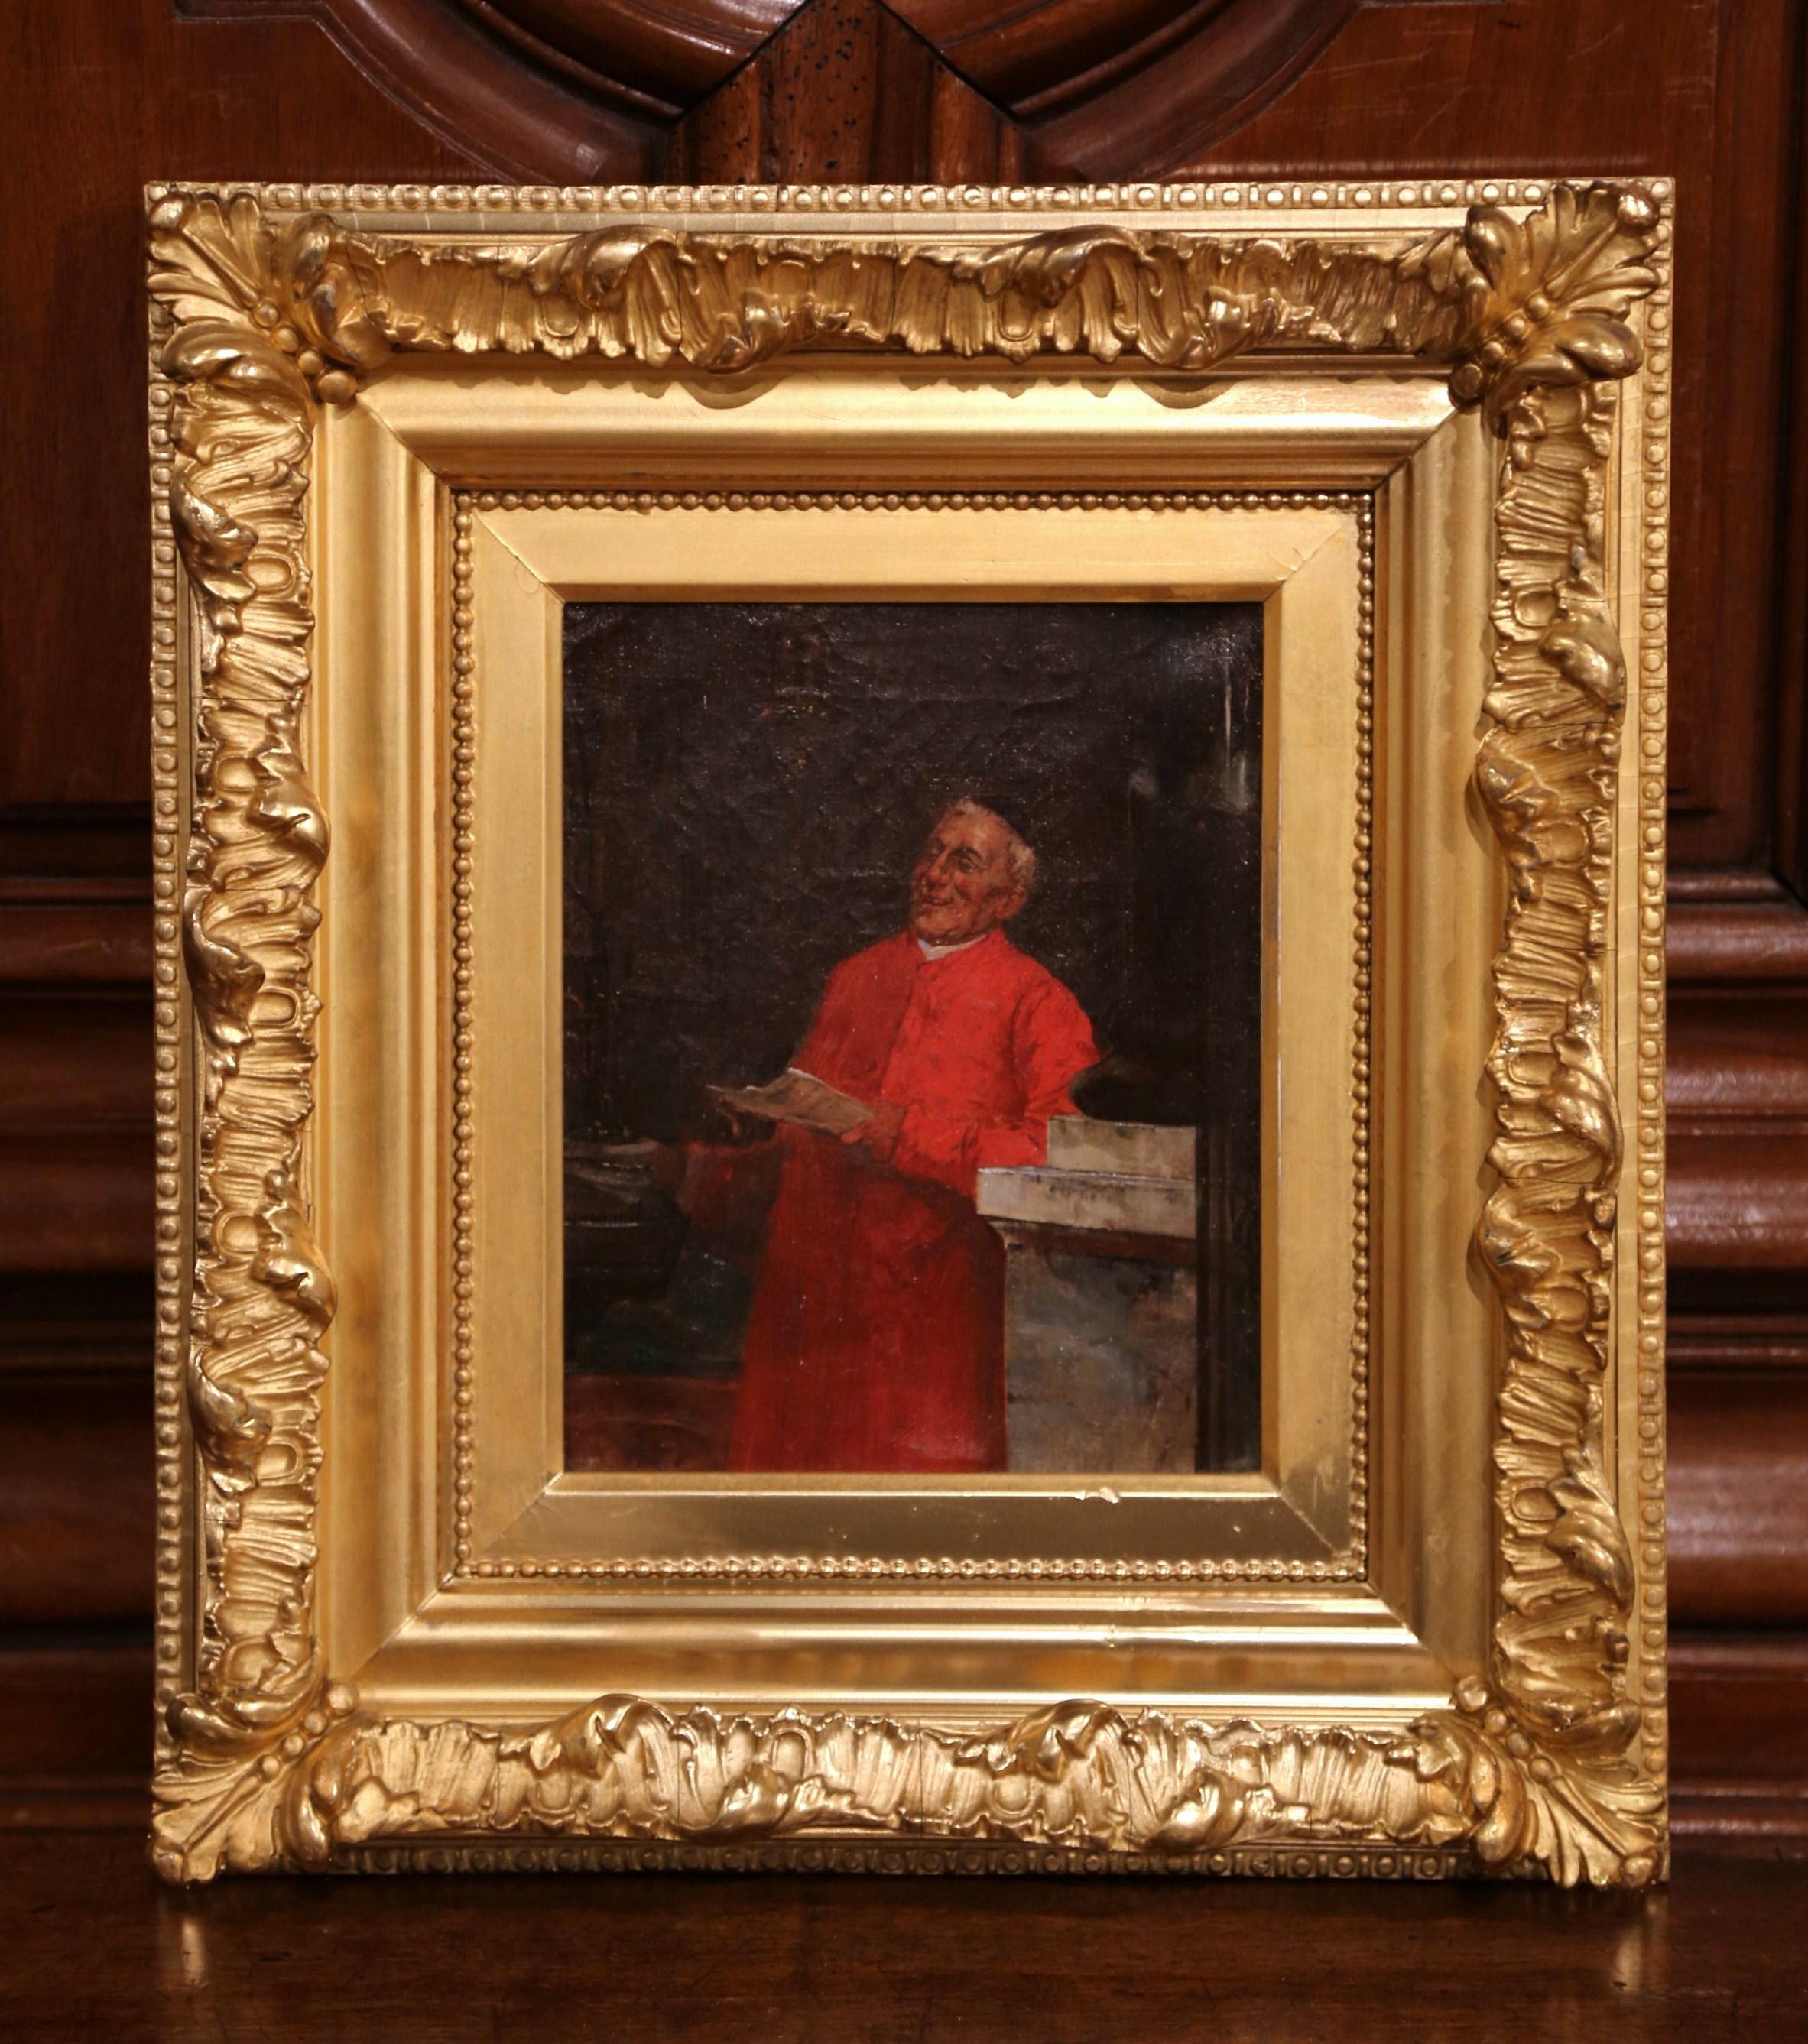 This antique portrait painting was created in France circa 1850. The rectangular artwork is set inside a carved gilt wood frame and depicts a French cardinal dressed in a traditional red cassock. His expression is jovial, he smiles and appears to be